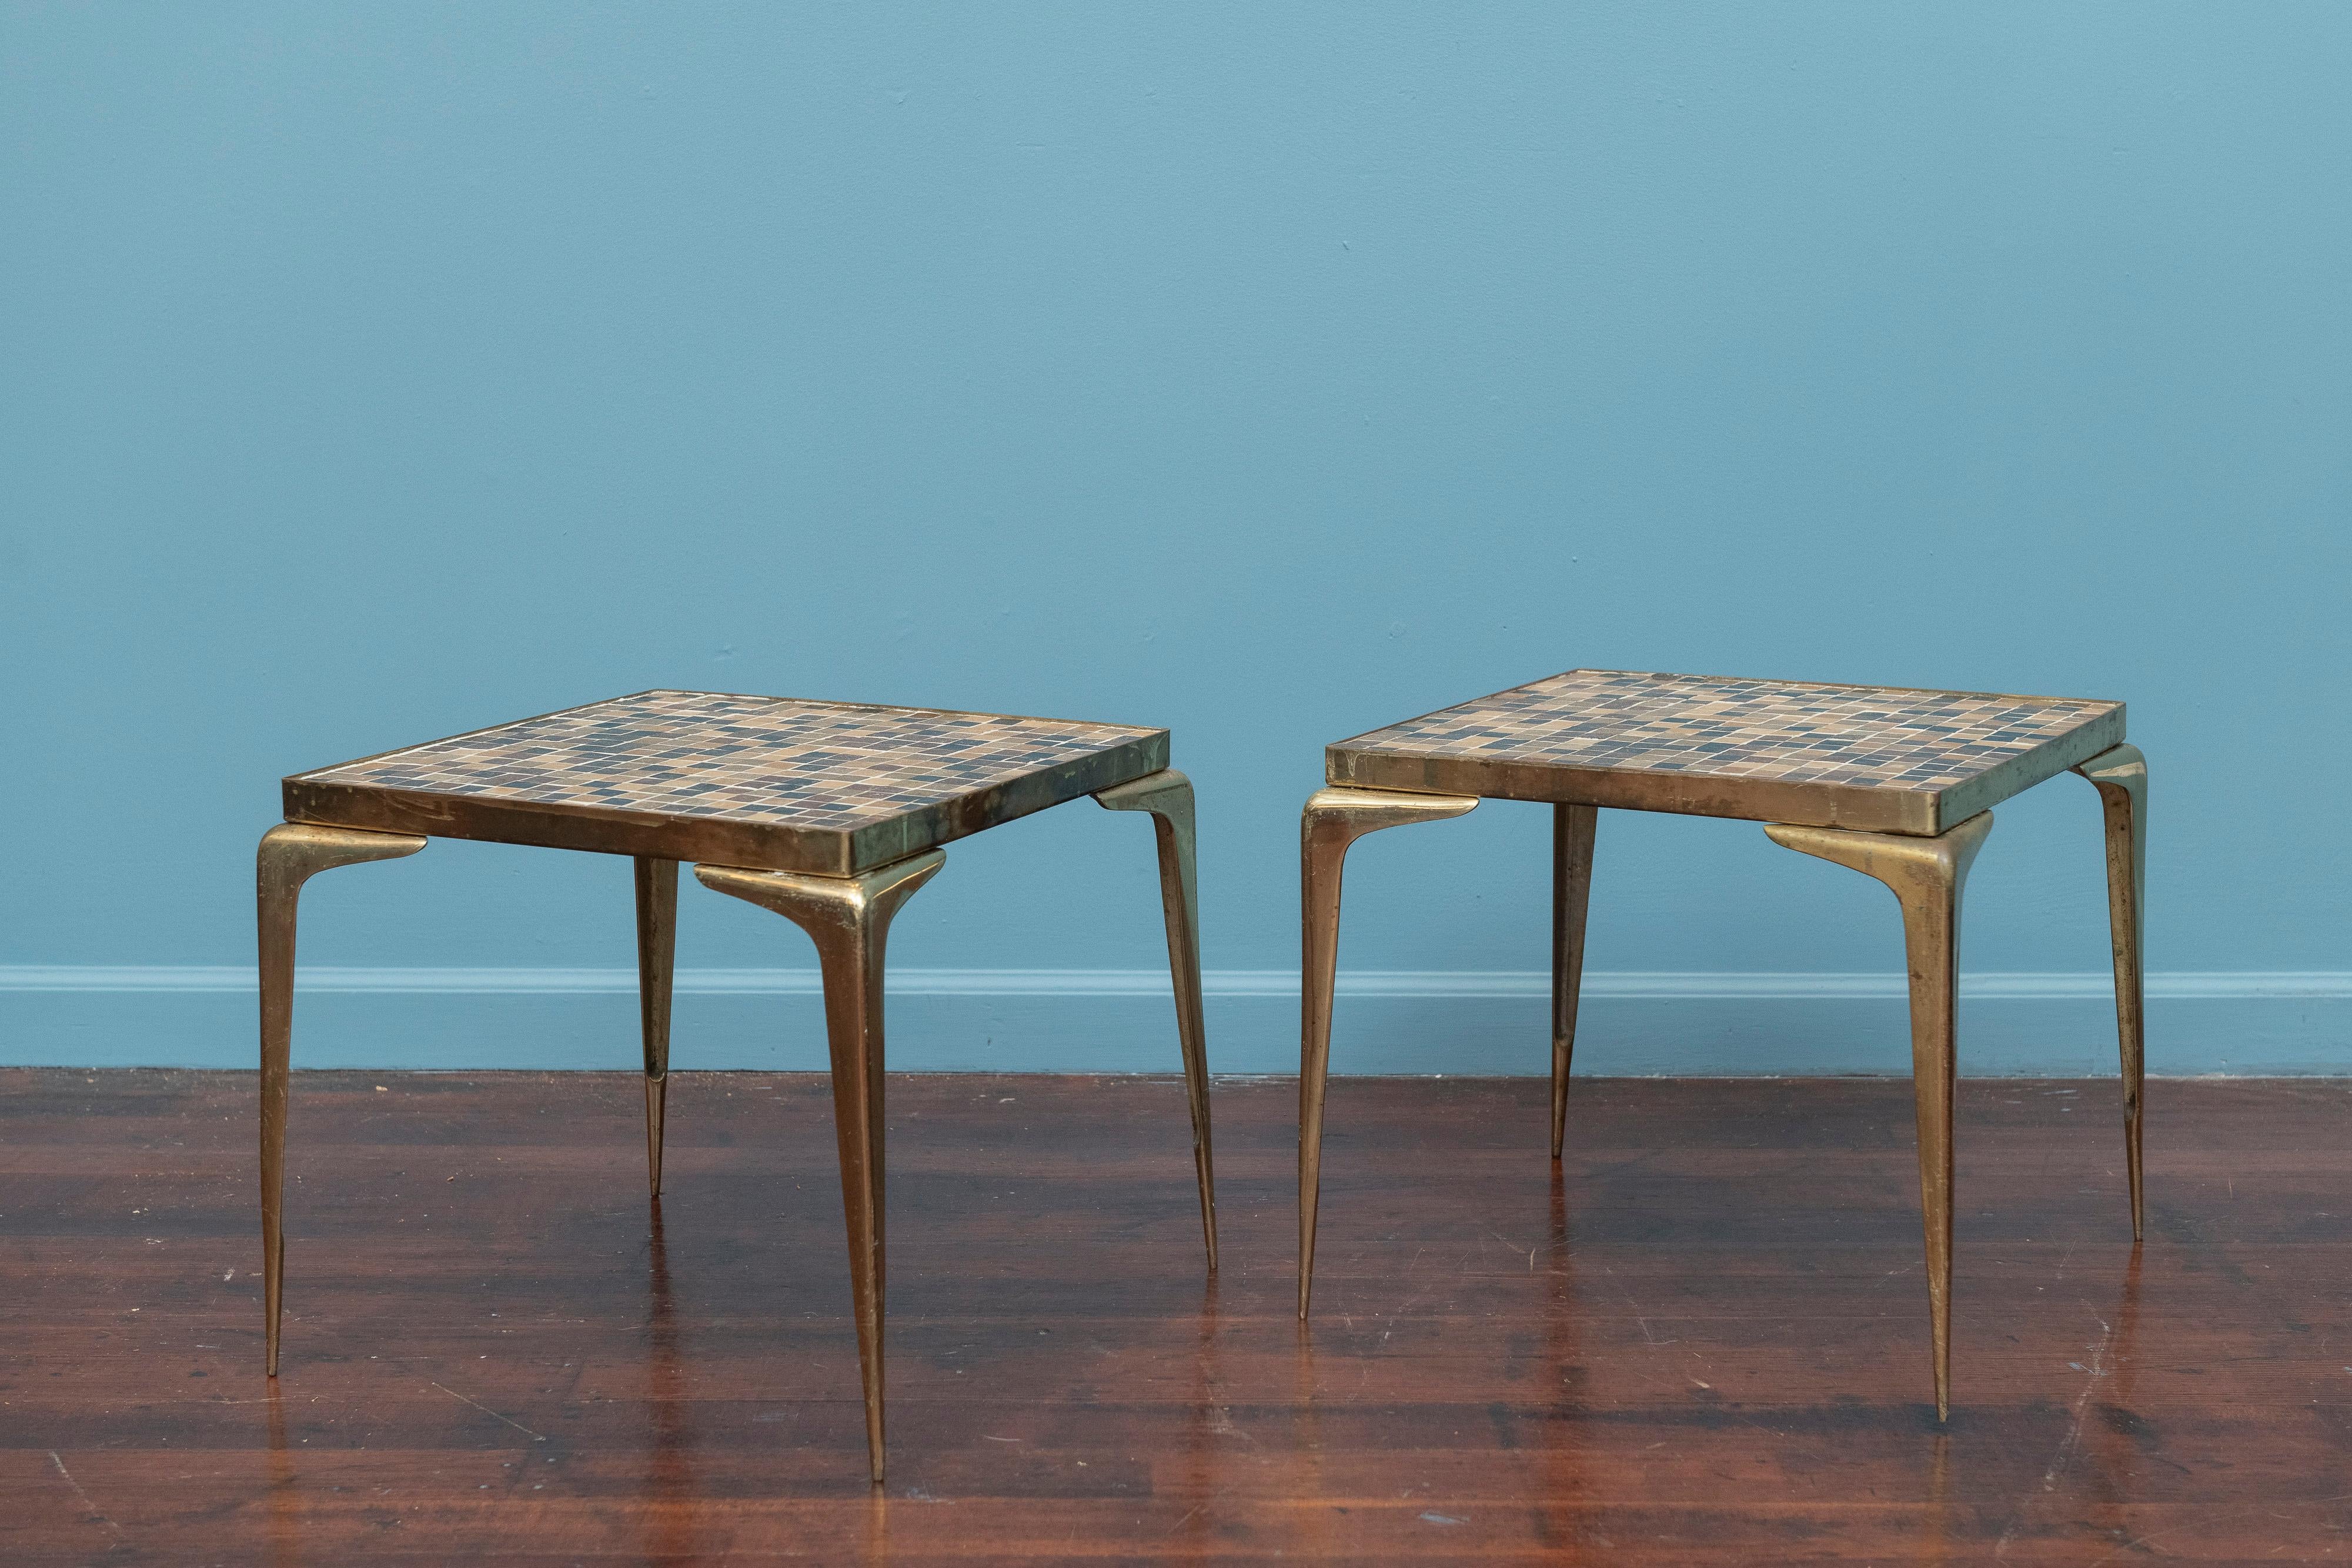 Pair of mid-century modern mosaic tile top side tables in brass frames with saber legs. Possibly Murano glass tiles inlaid in a random pattern, great for indoor or outdoor use. In good condition with patina throughout. 